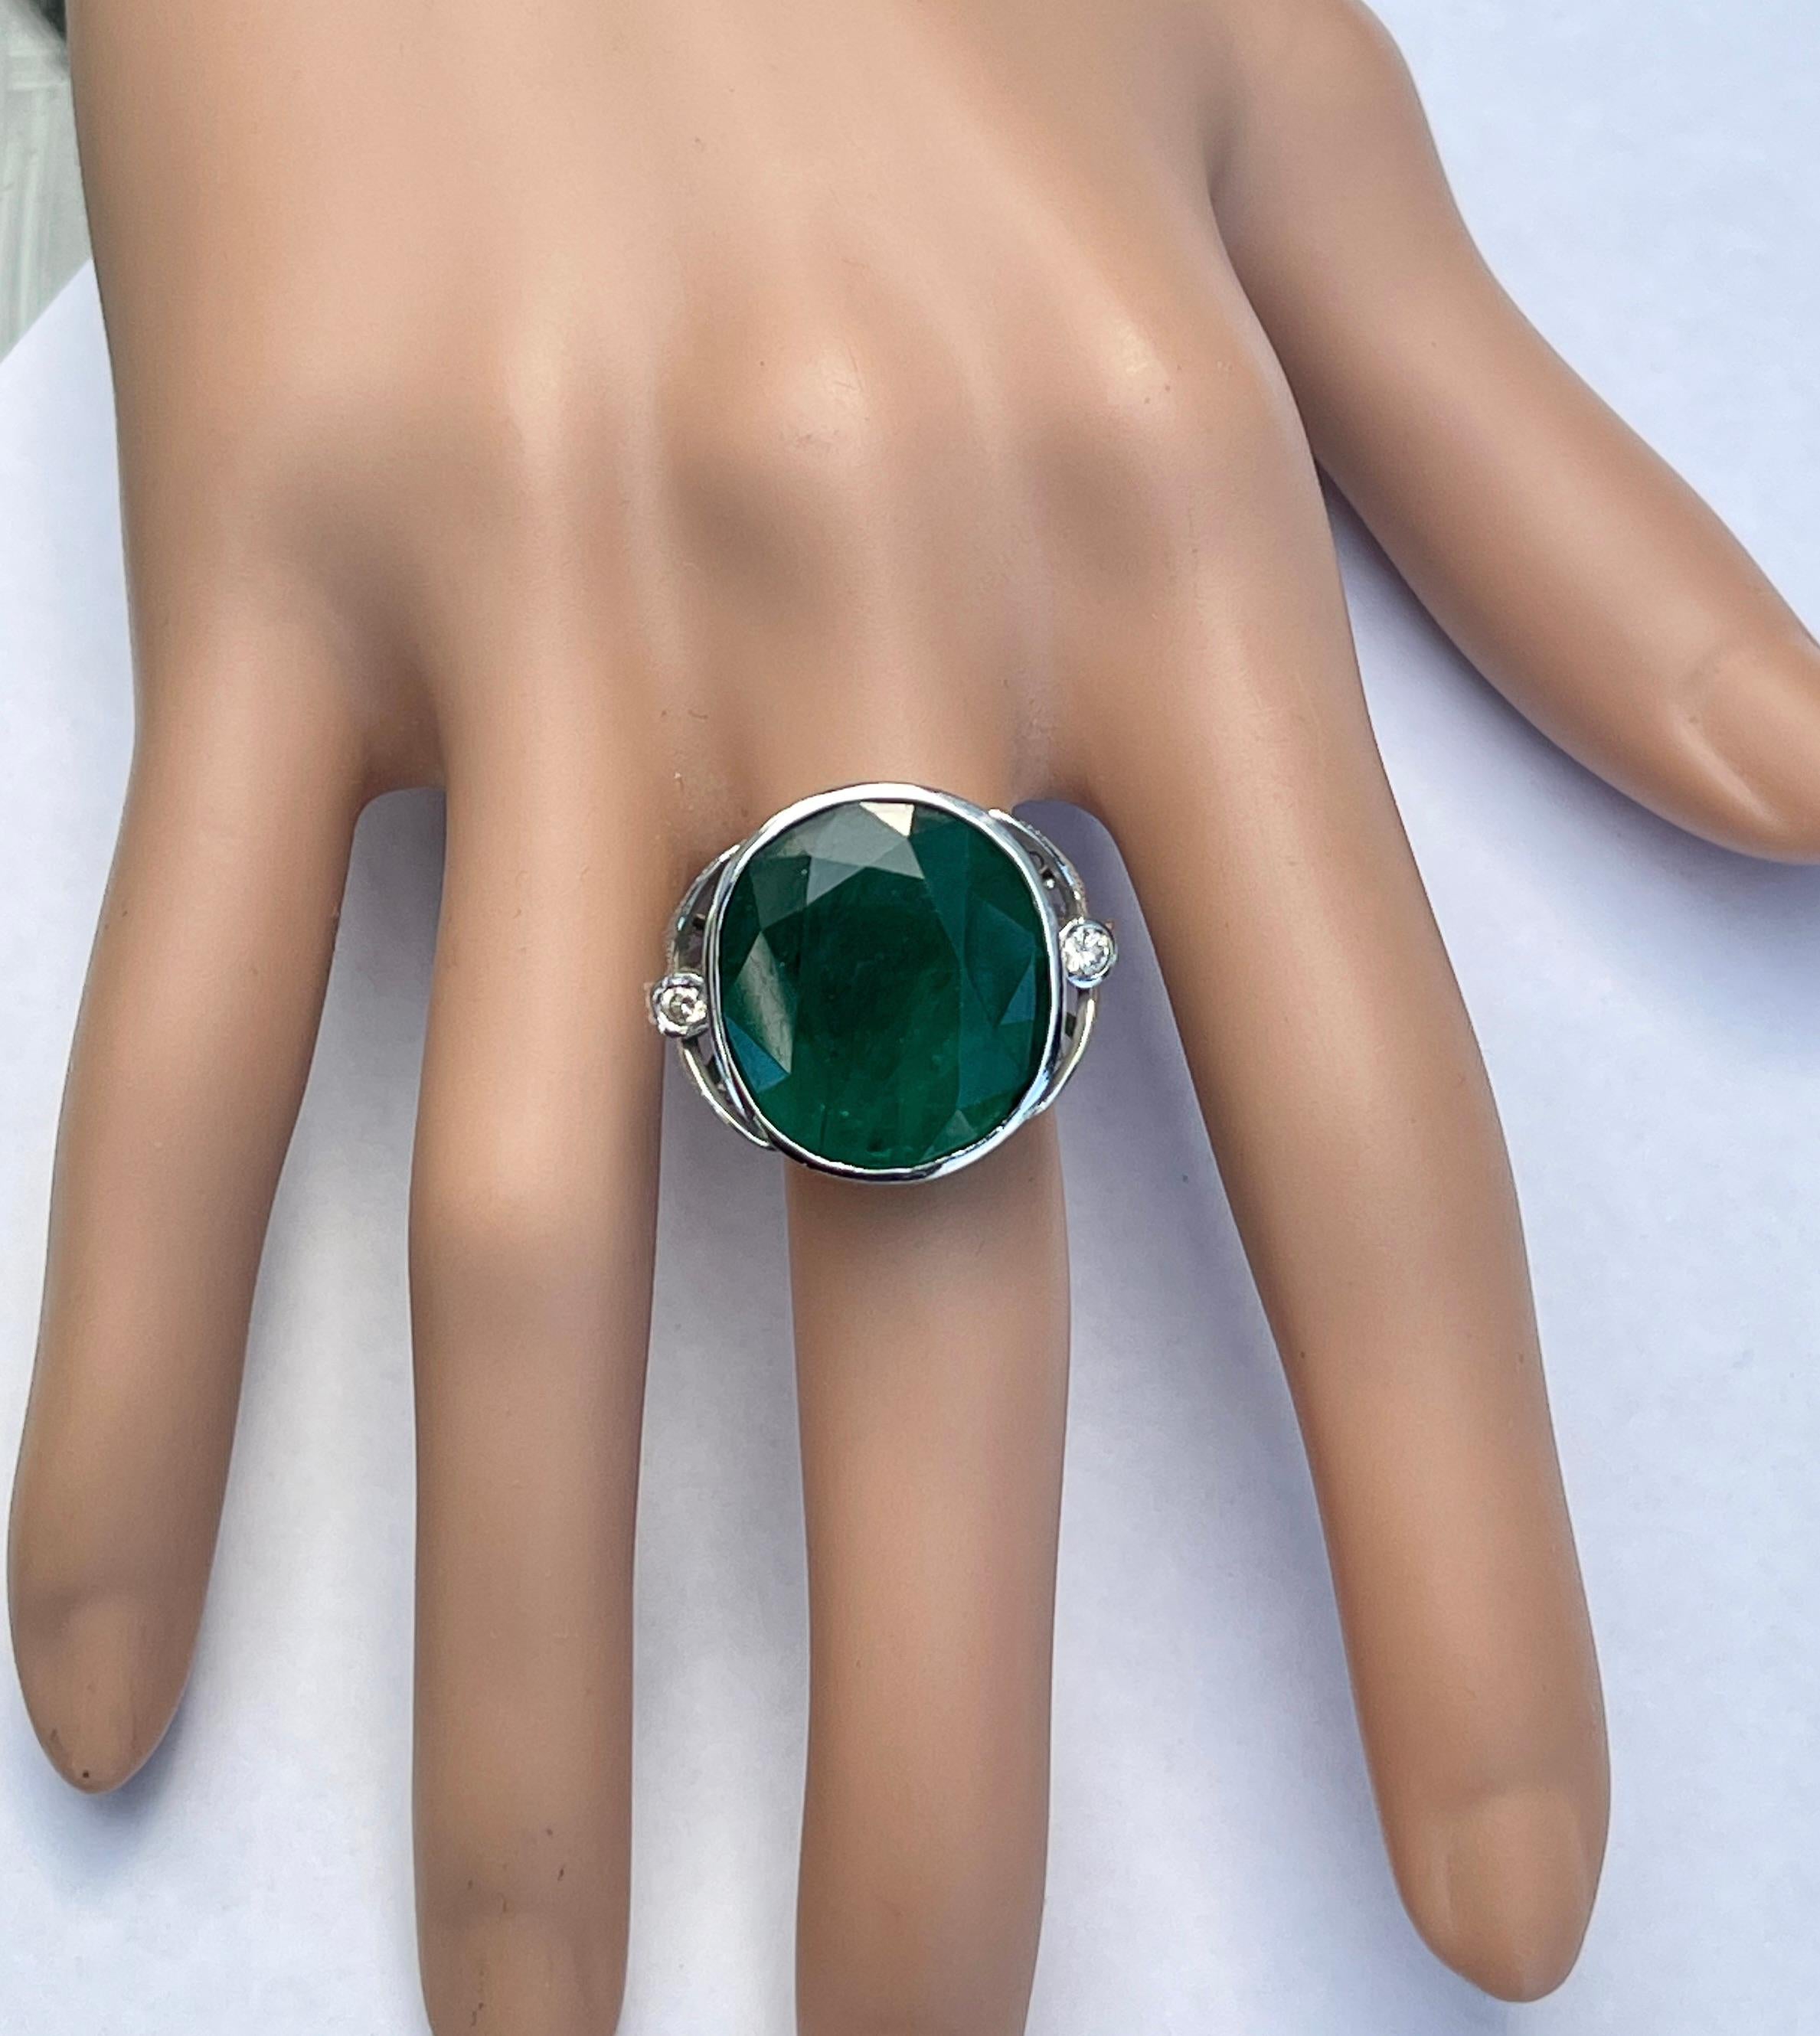 Women's Amazing Huge 20CT Natural Emerald Diamond Ring 9ct White Gold with Valuation For Sale